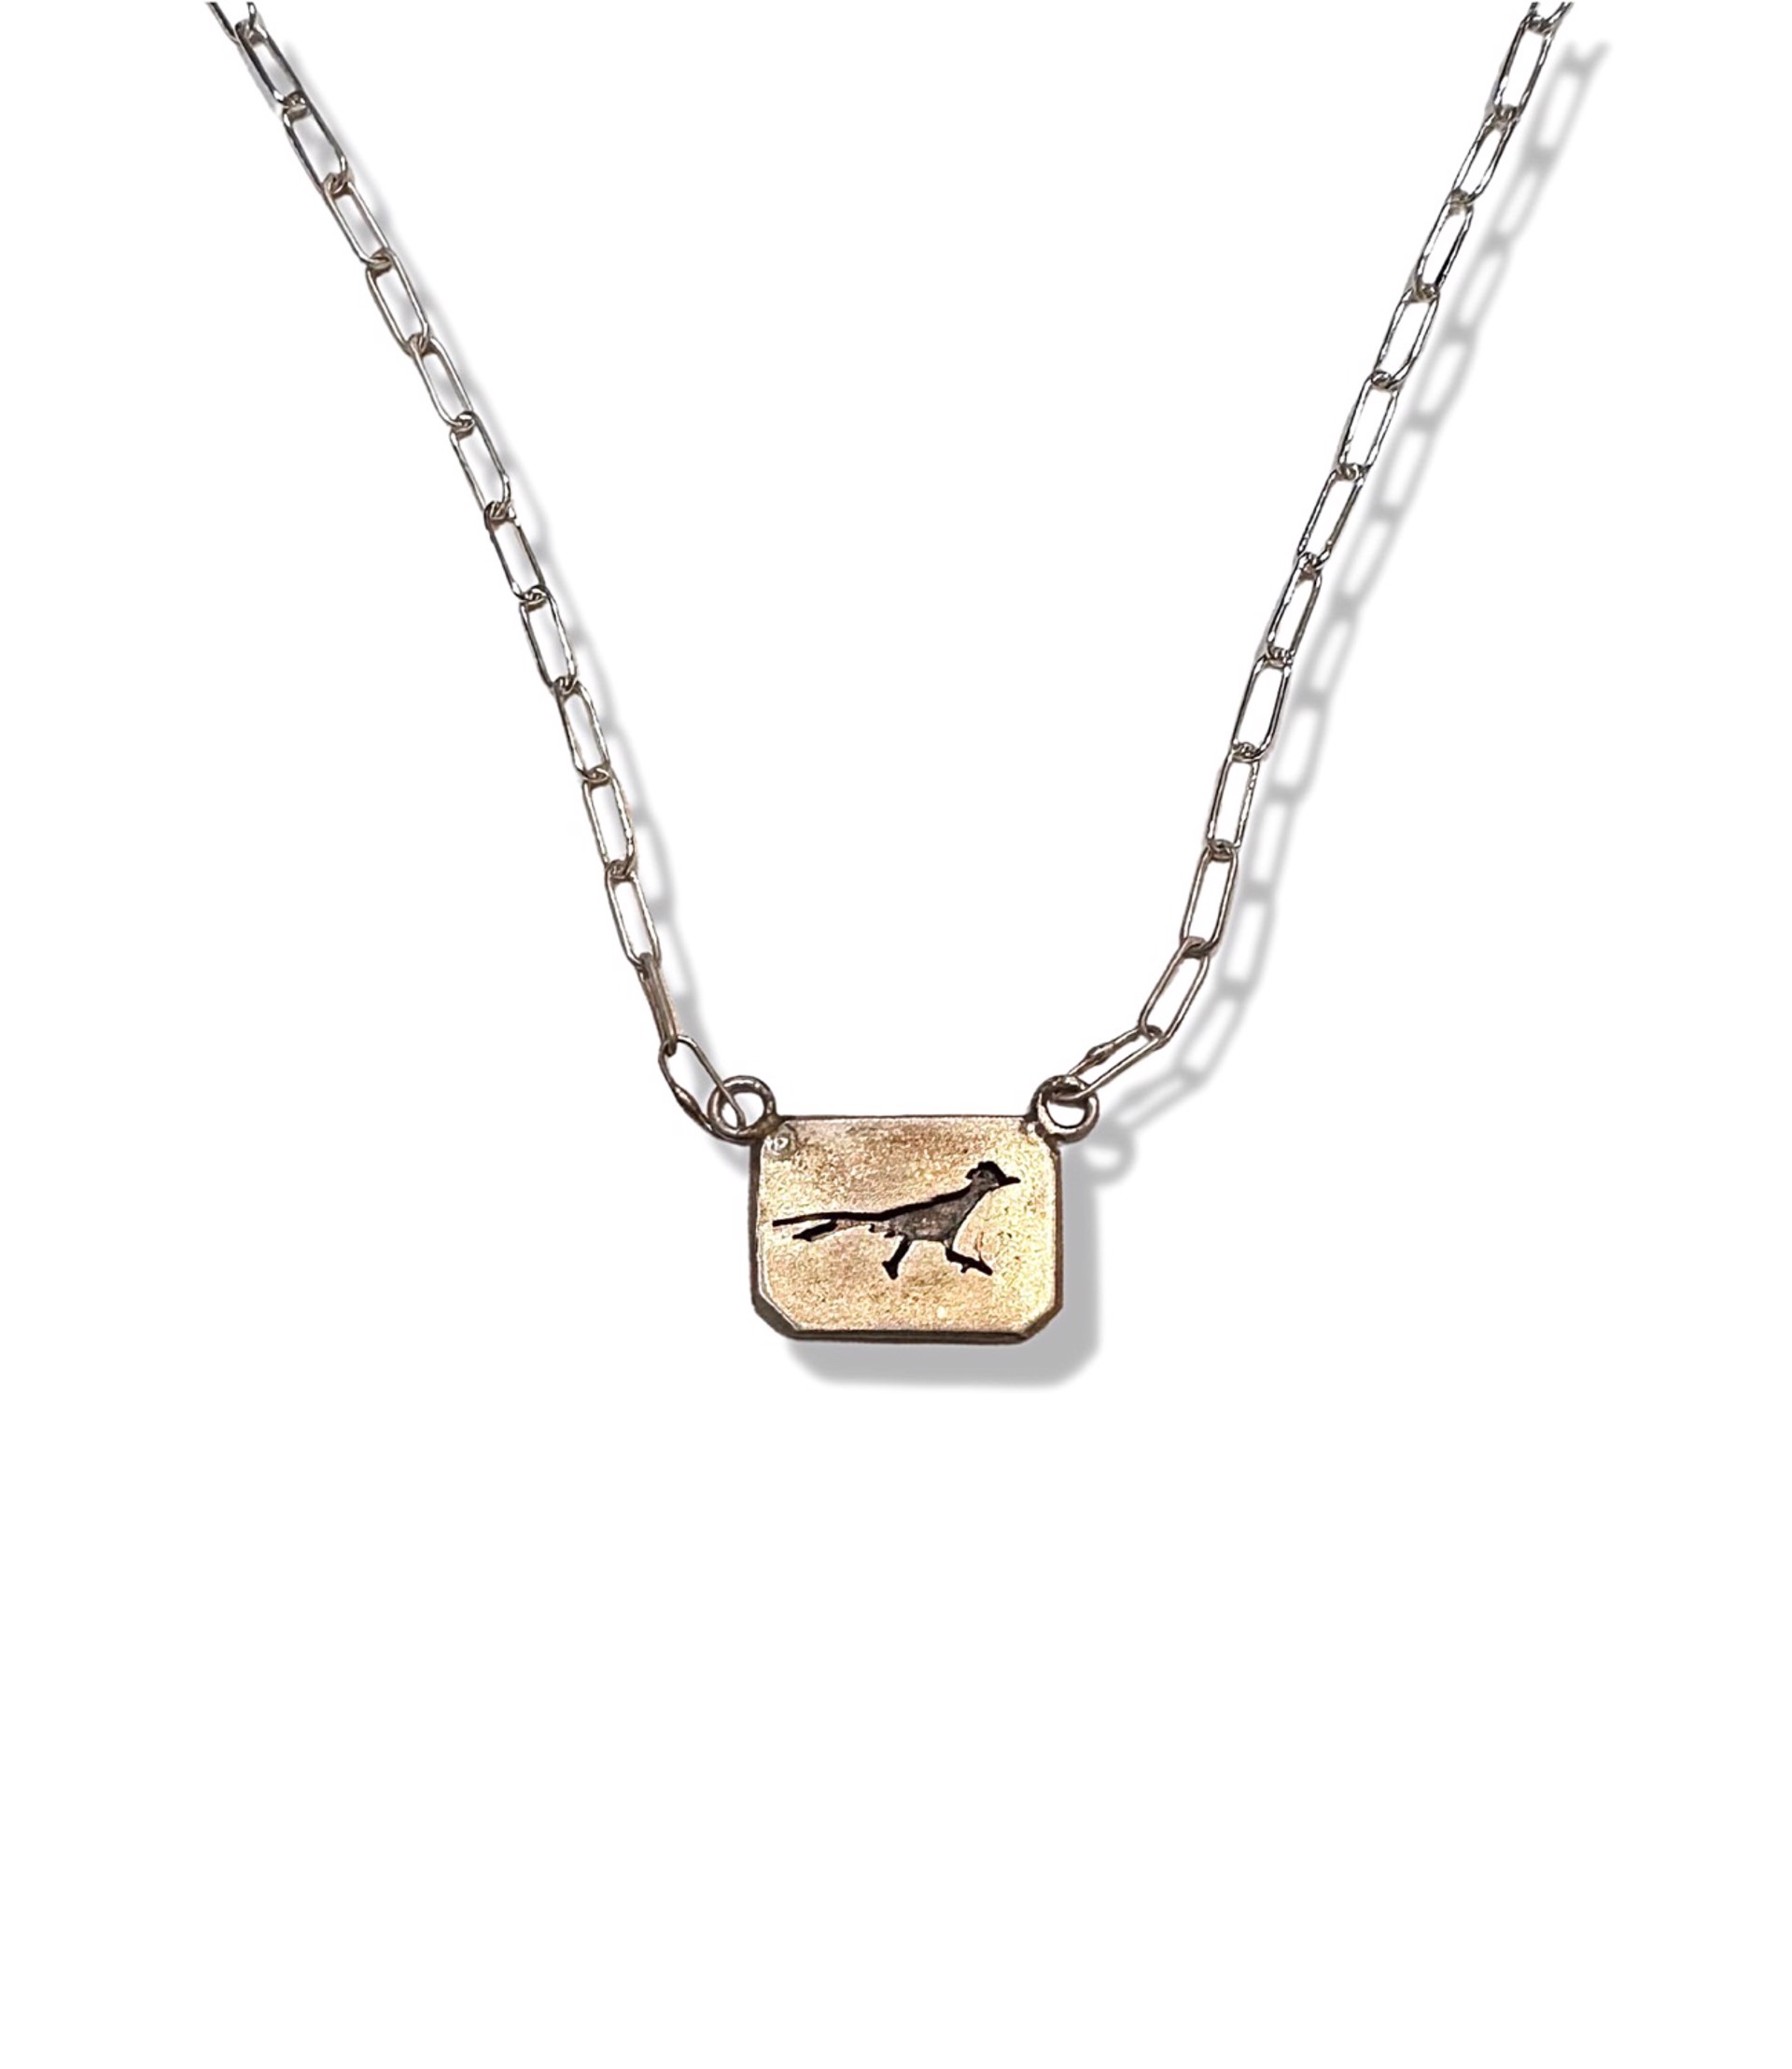 Necklace - Roadrunner set in Sterling Silver (Small) by Pattie Parkhurst